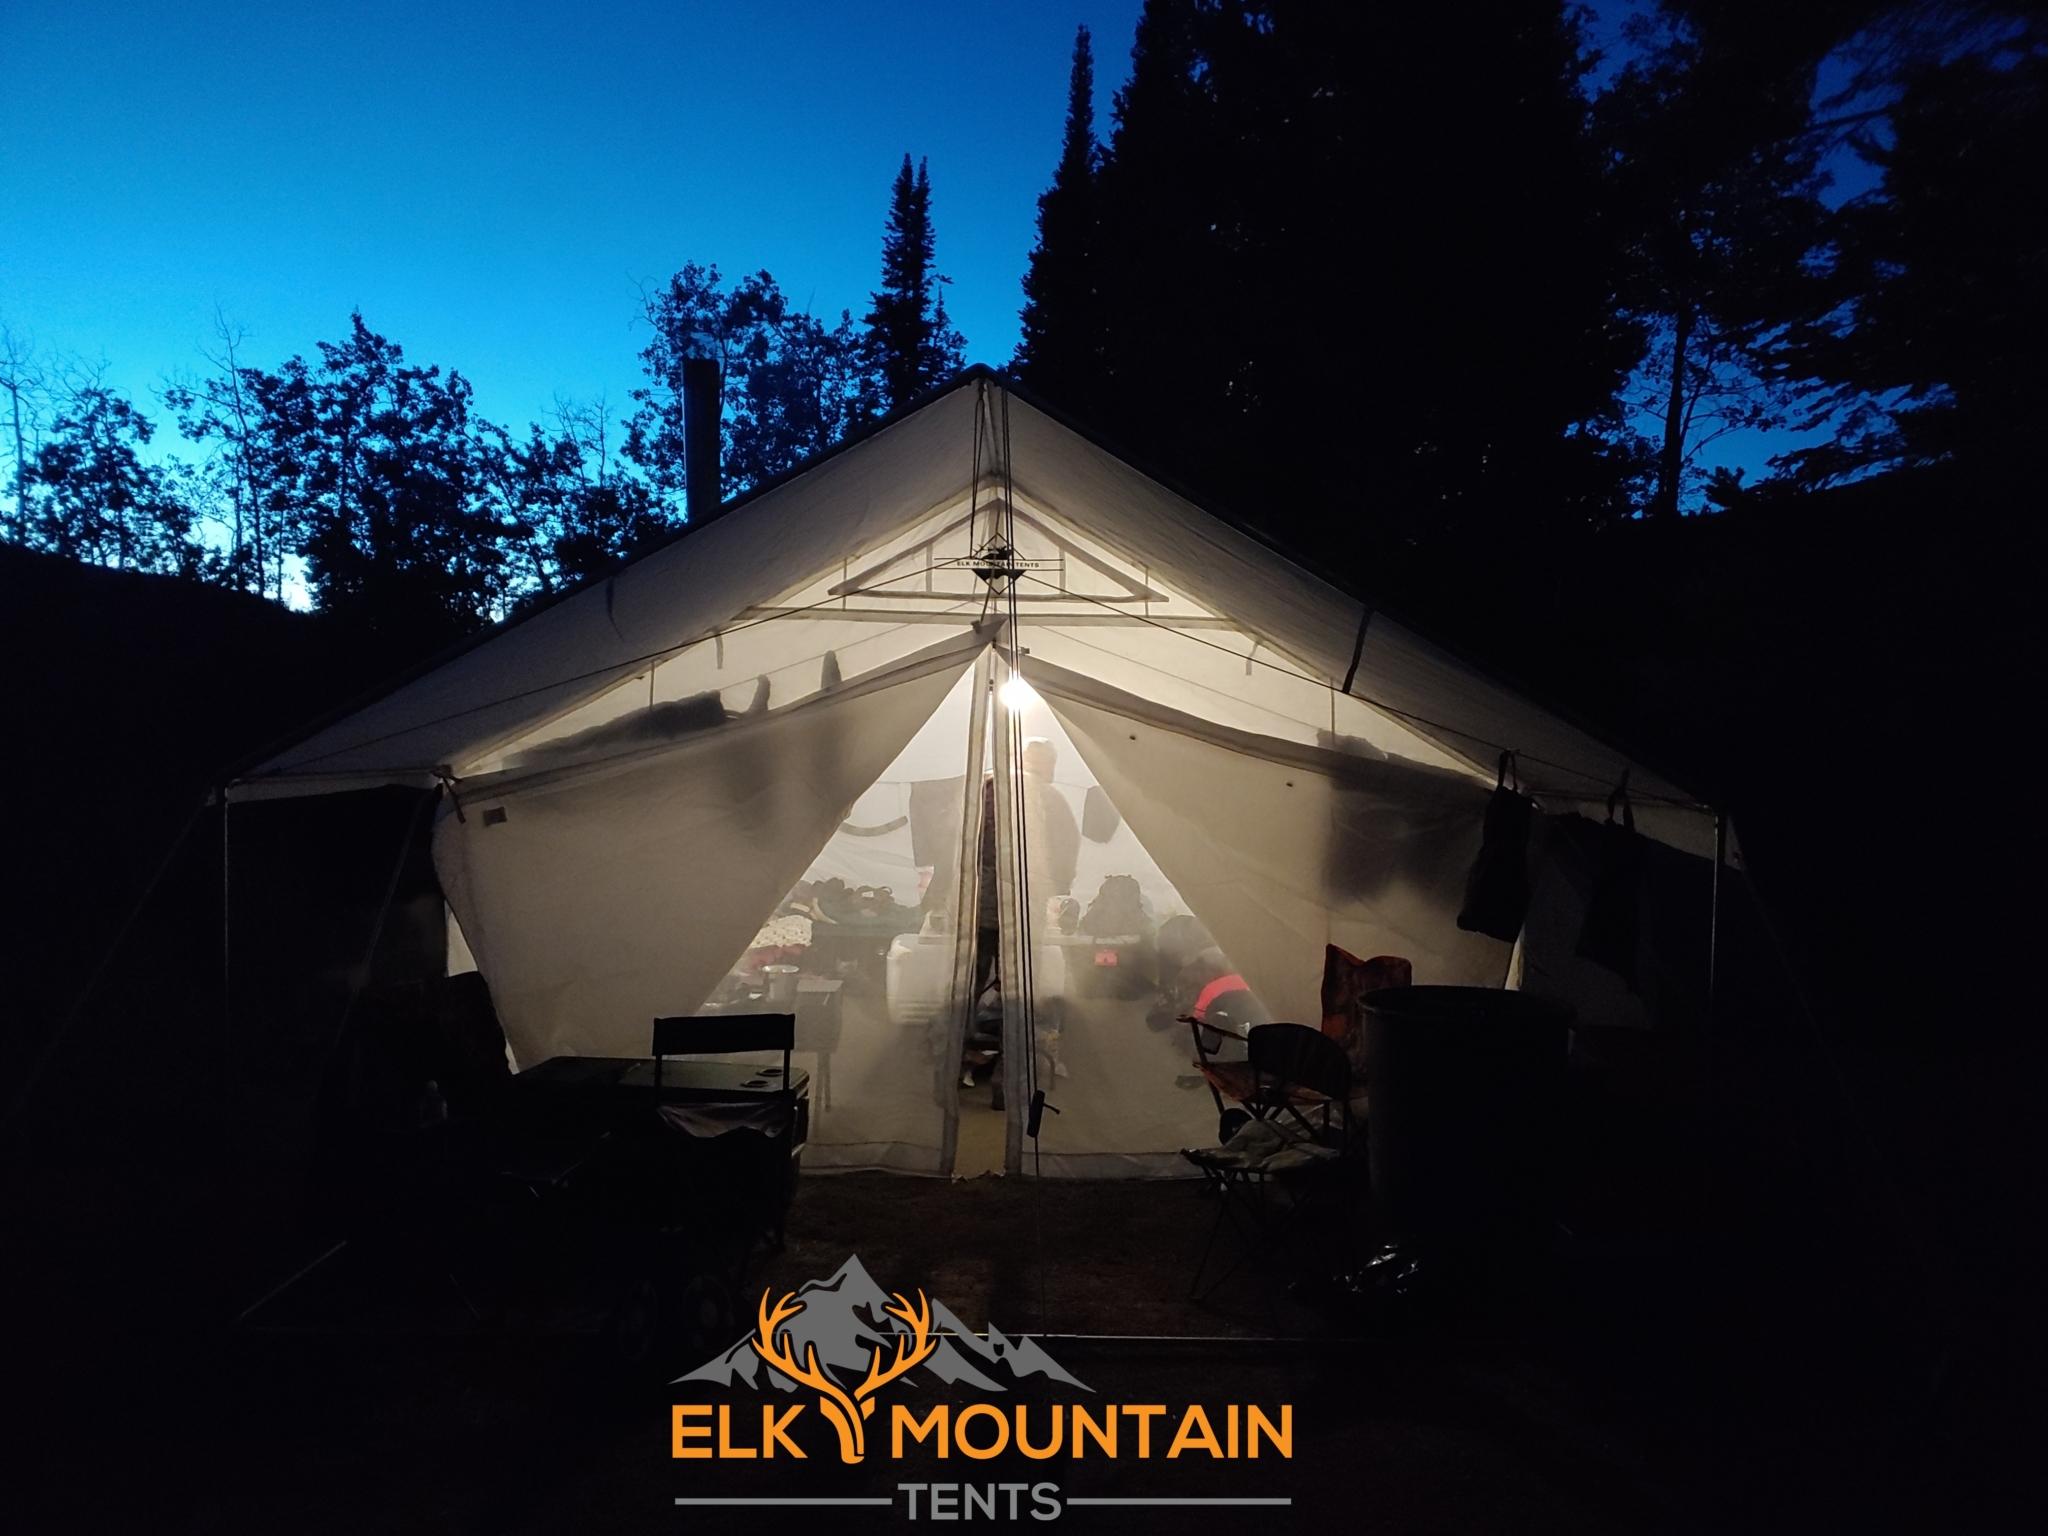 wall tent stove
alaknak tent
cabin tents for sale
saturn rafts
winter tent with stove
cotton canvas
military canvas tents
montana canvas tents
canvas cabin tents
elk photos